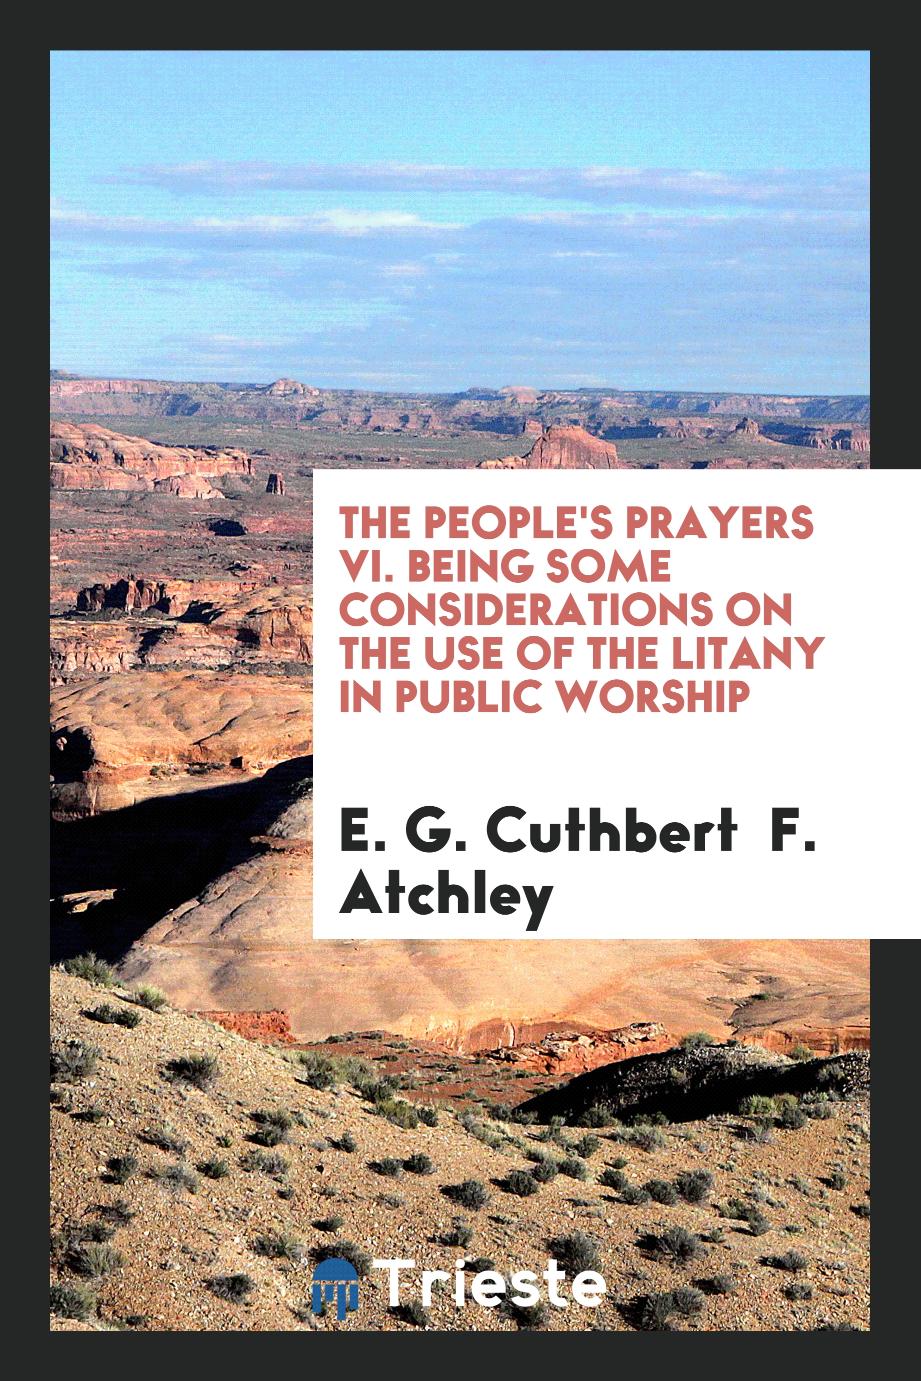 The people's prayers VI. Being some considerations on the use of the litany in public worship